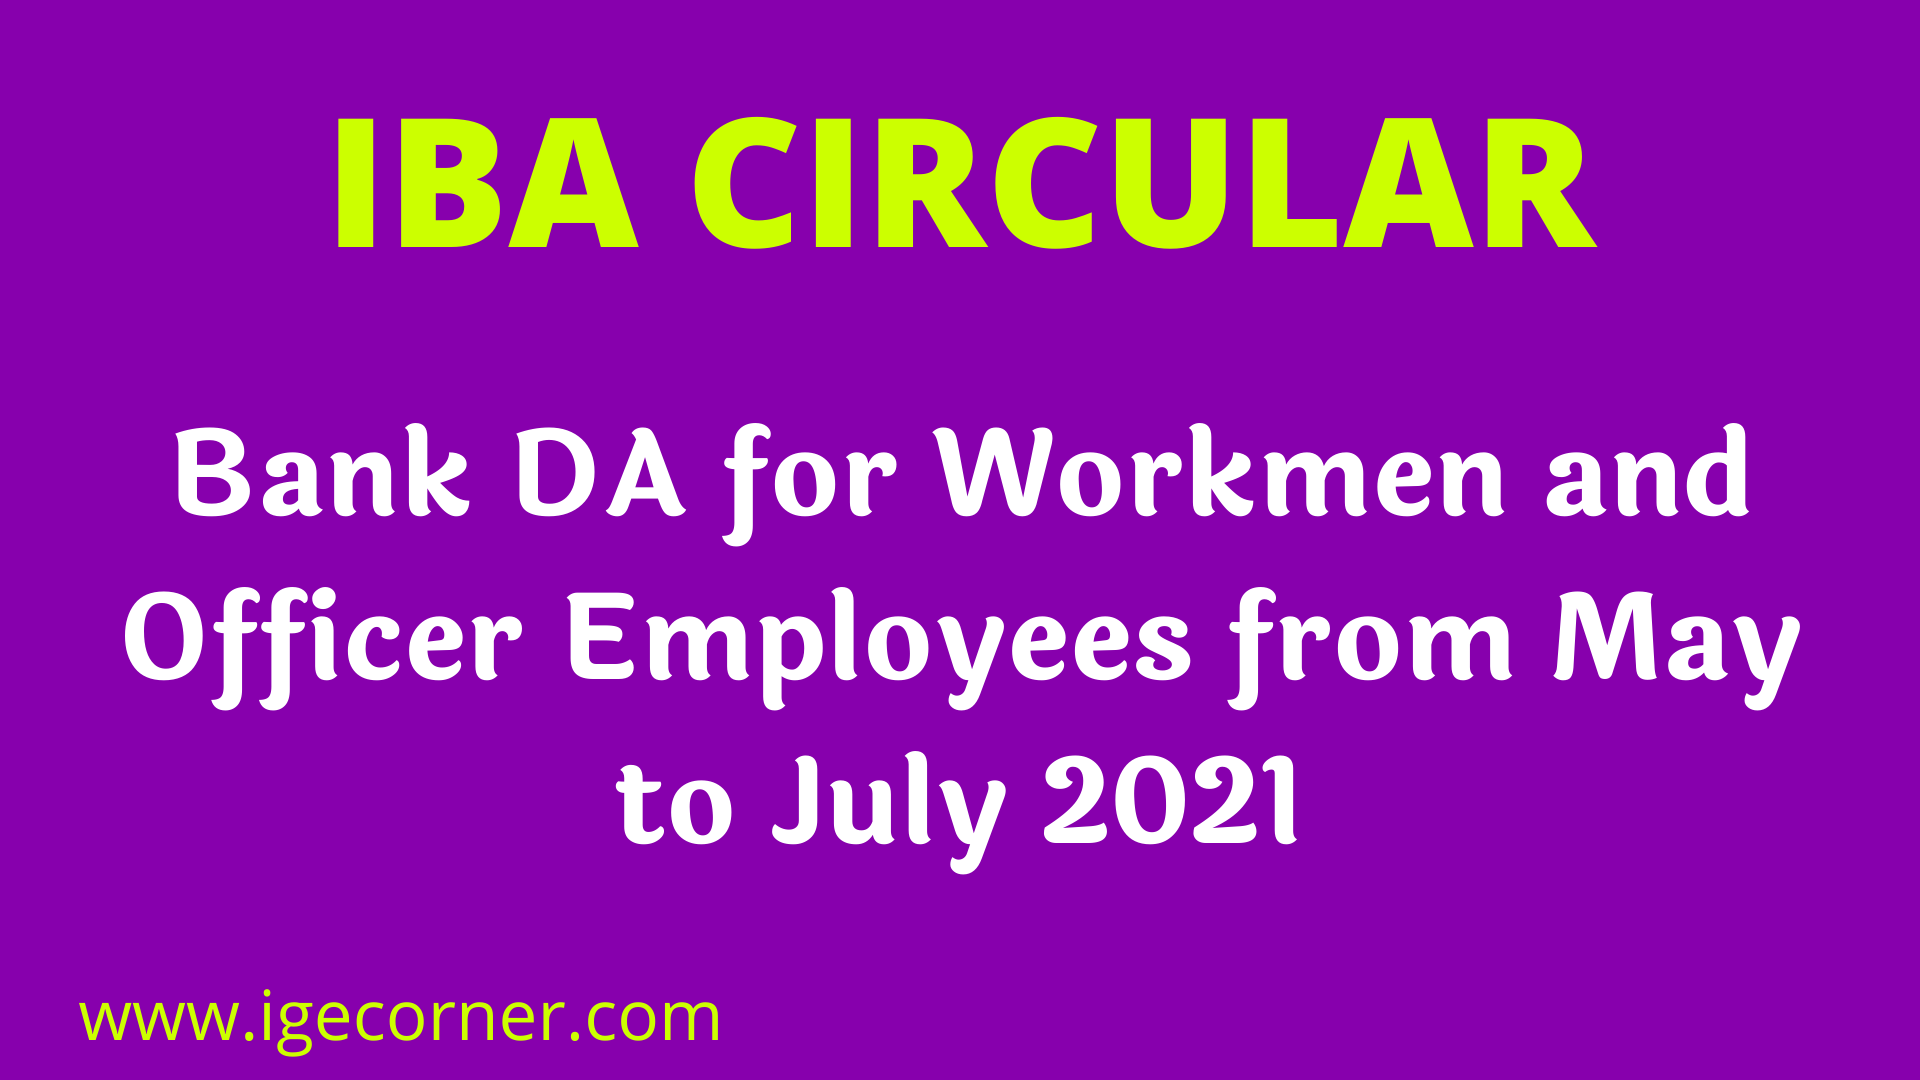 Bank DA for Workmen and Officer Employees from May to July 2021 IBA